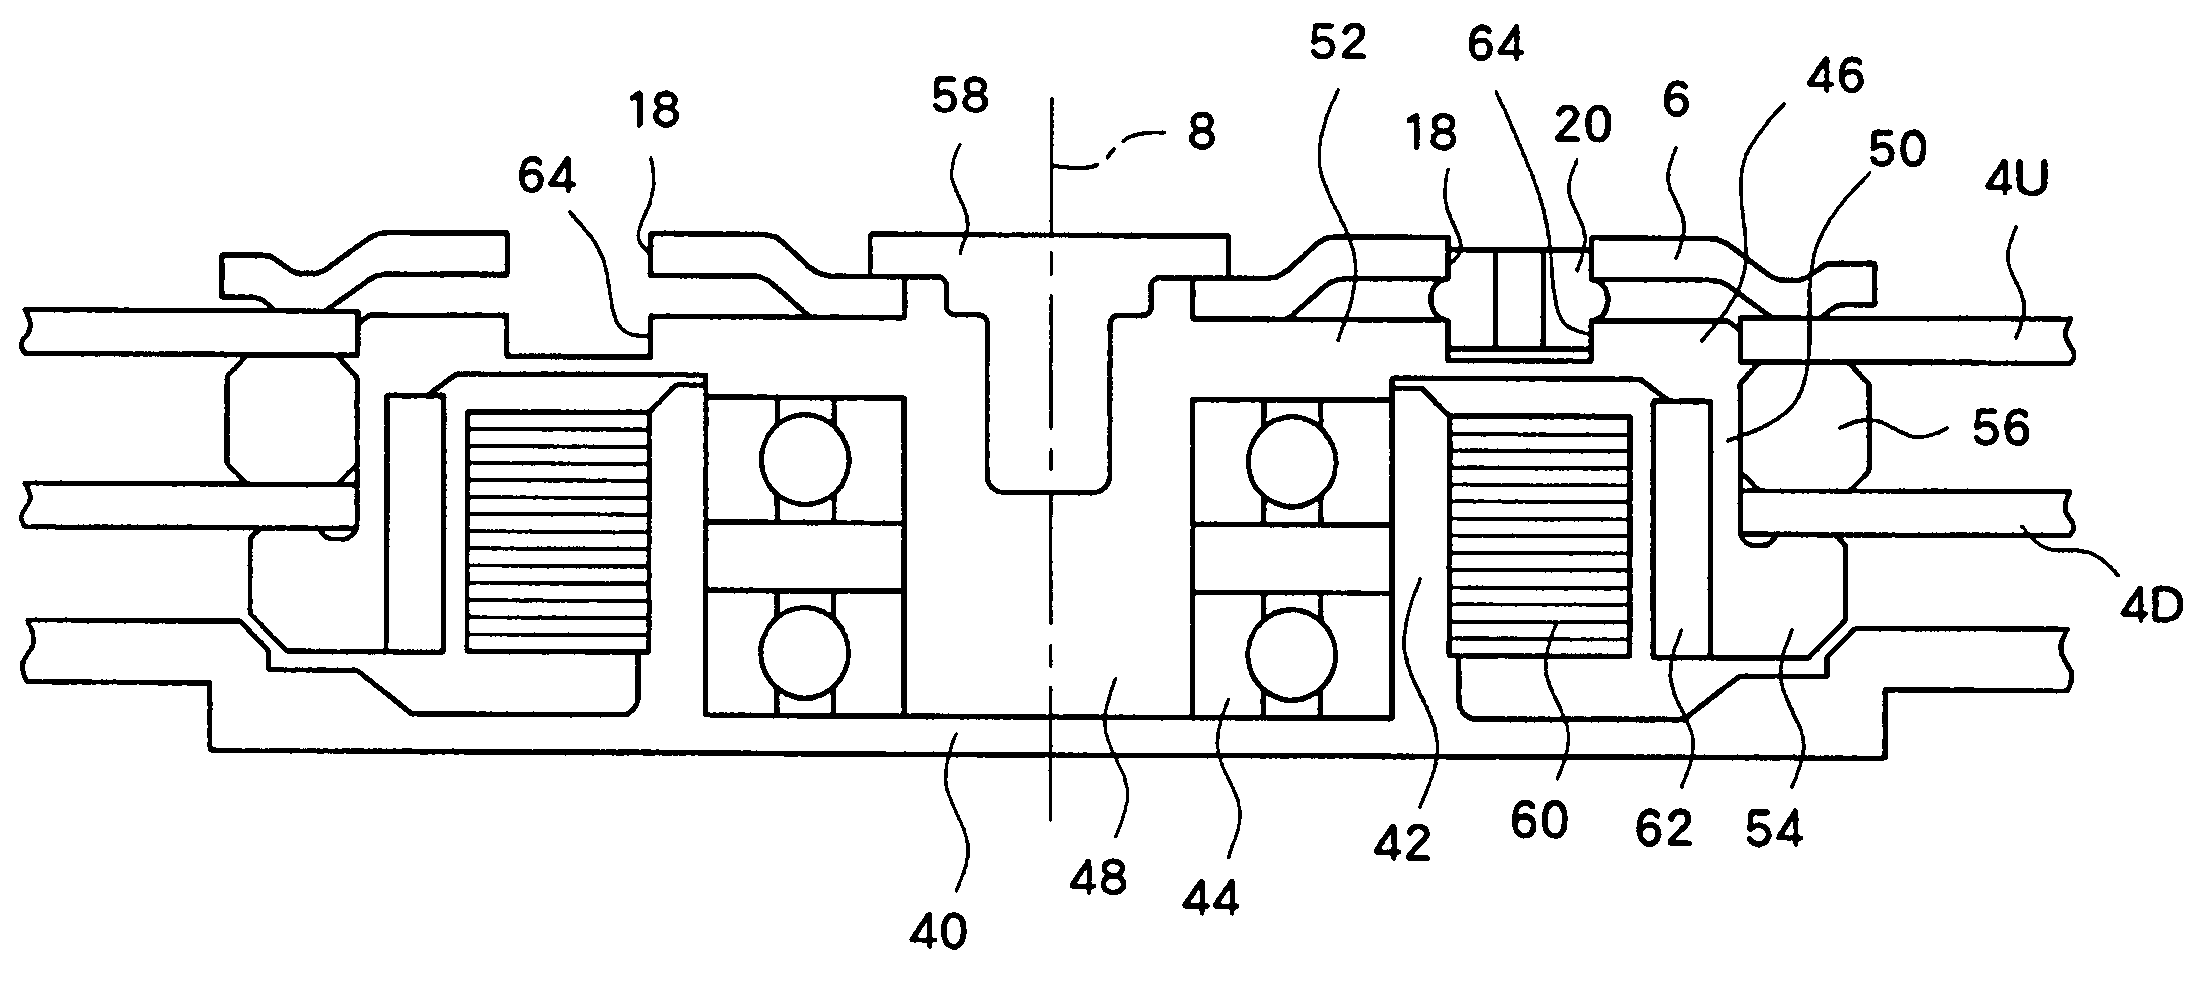 Magnetic disk drive with adjustment of rotational balance